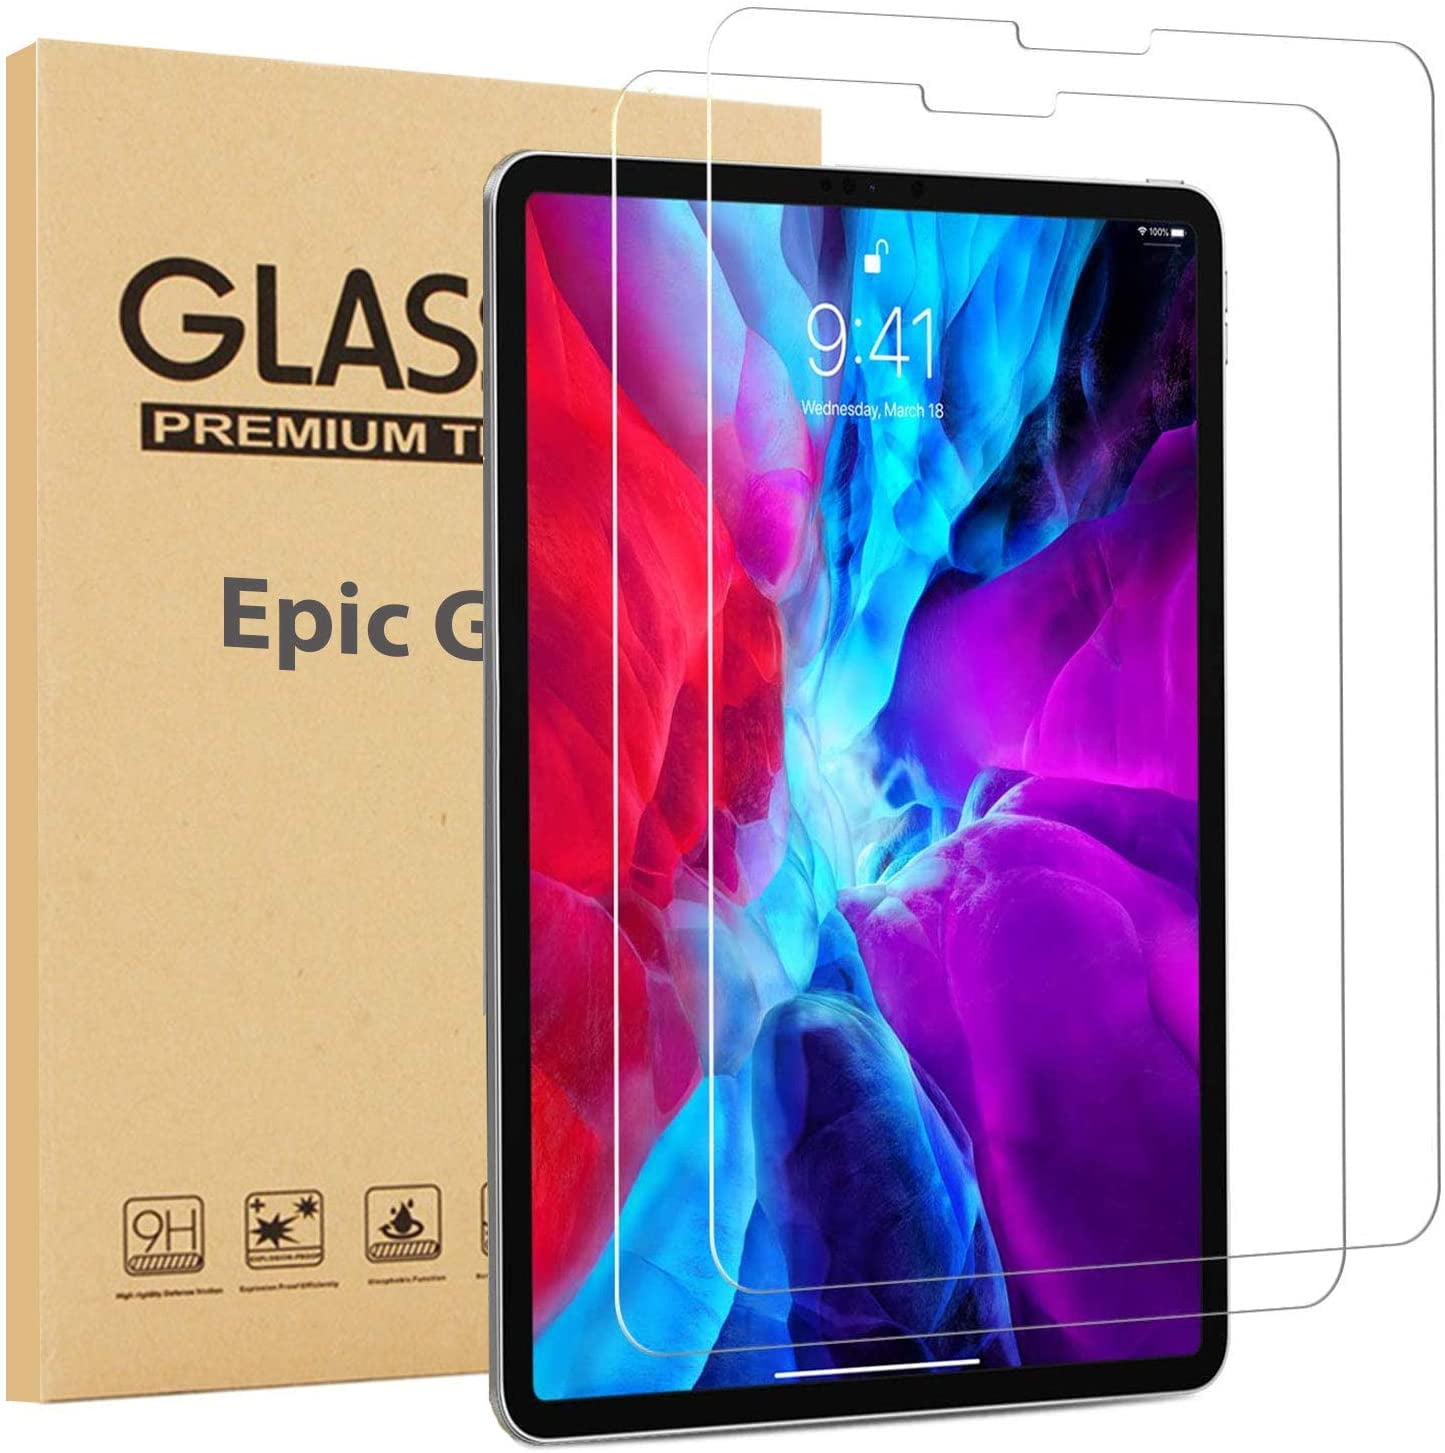 Tempered Glass Screen Protector For Apple iPad Pro 11 inch 2018 model 